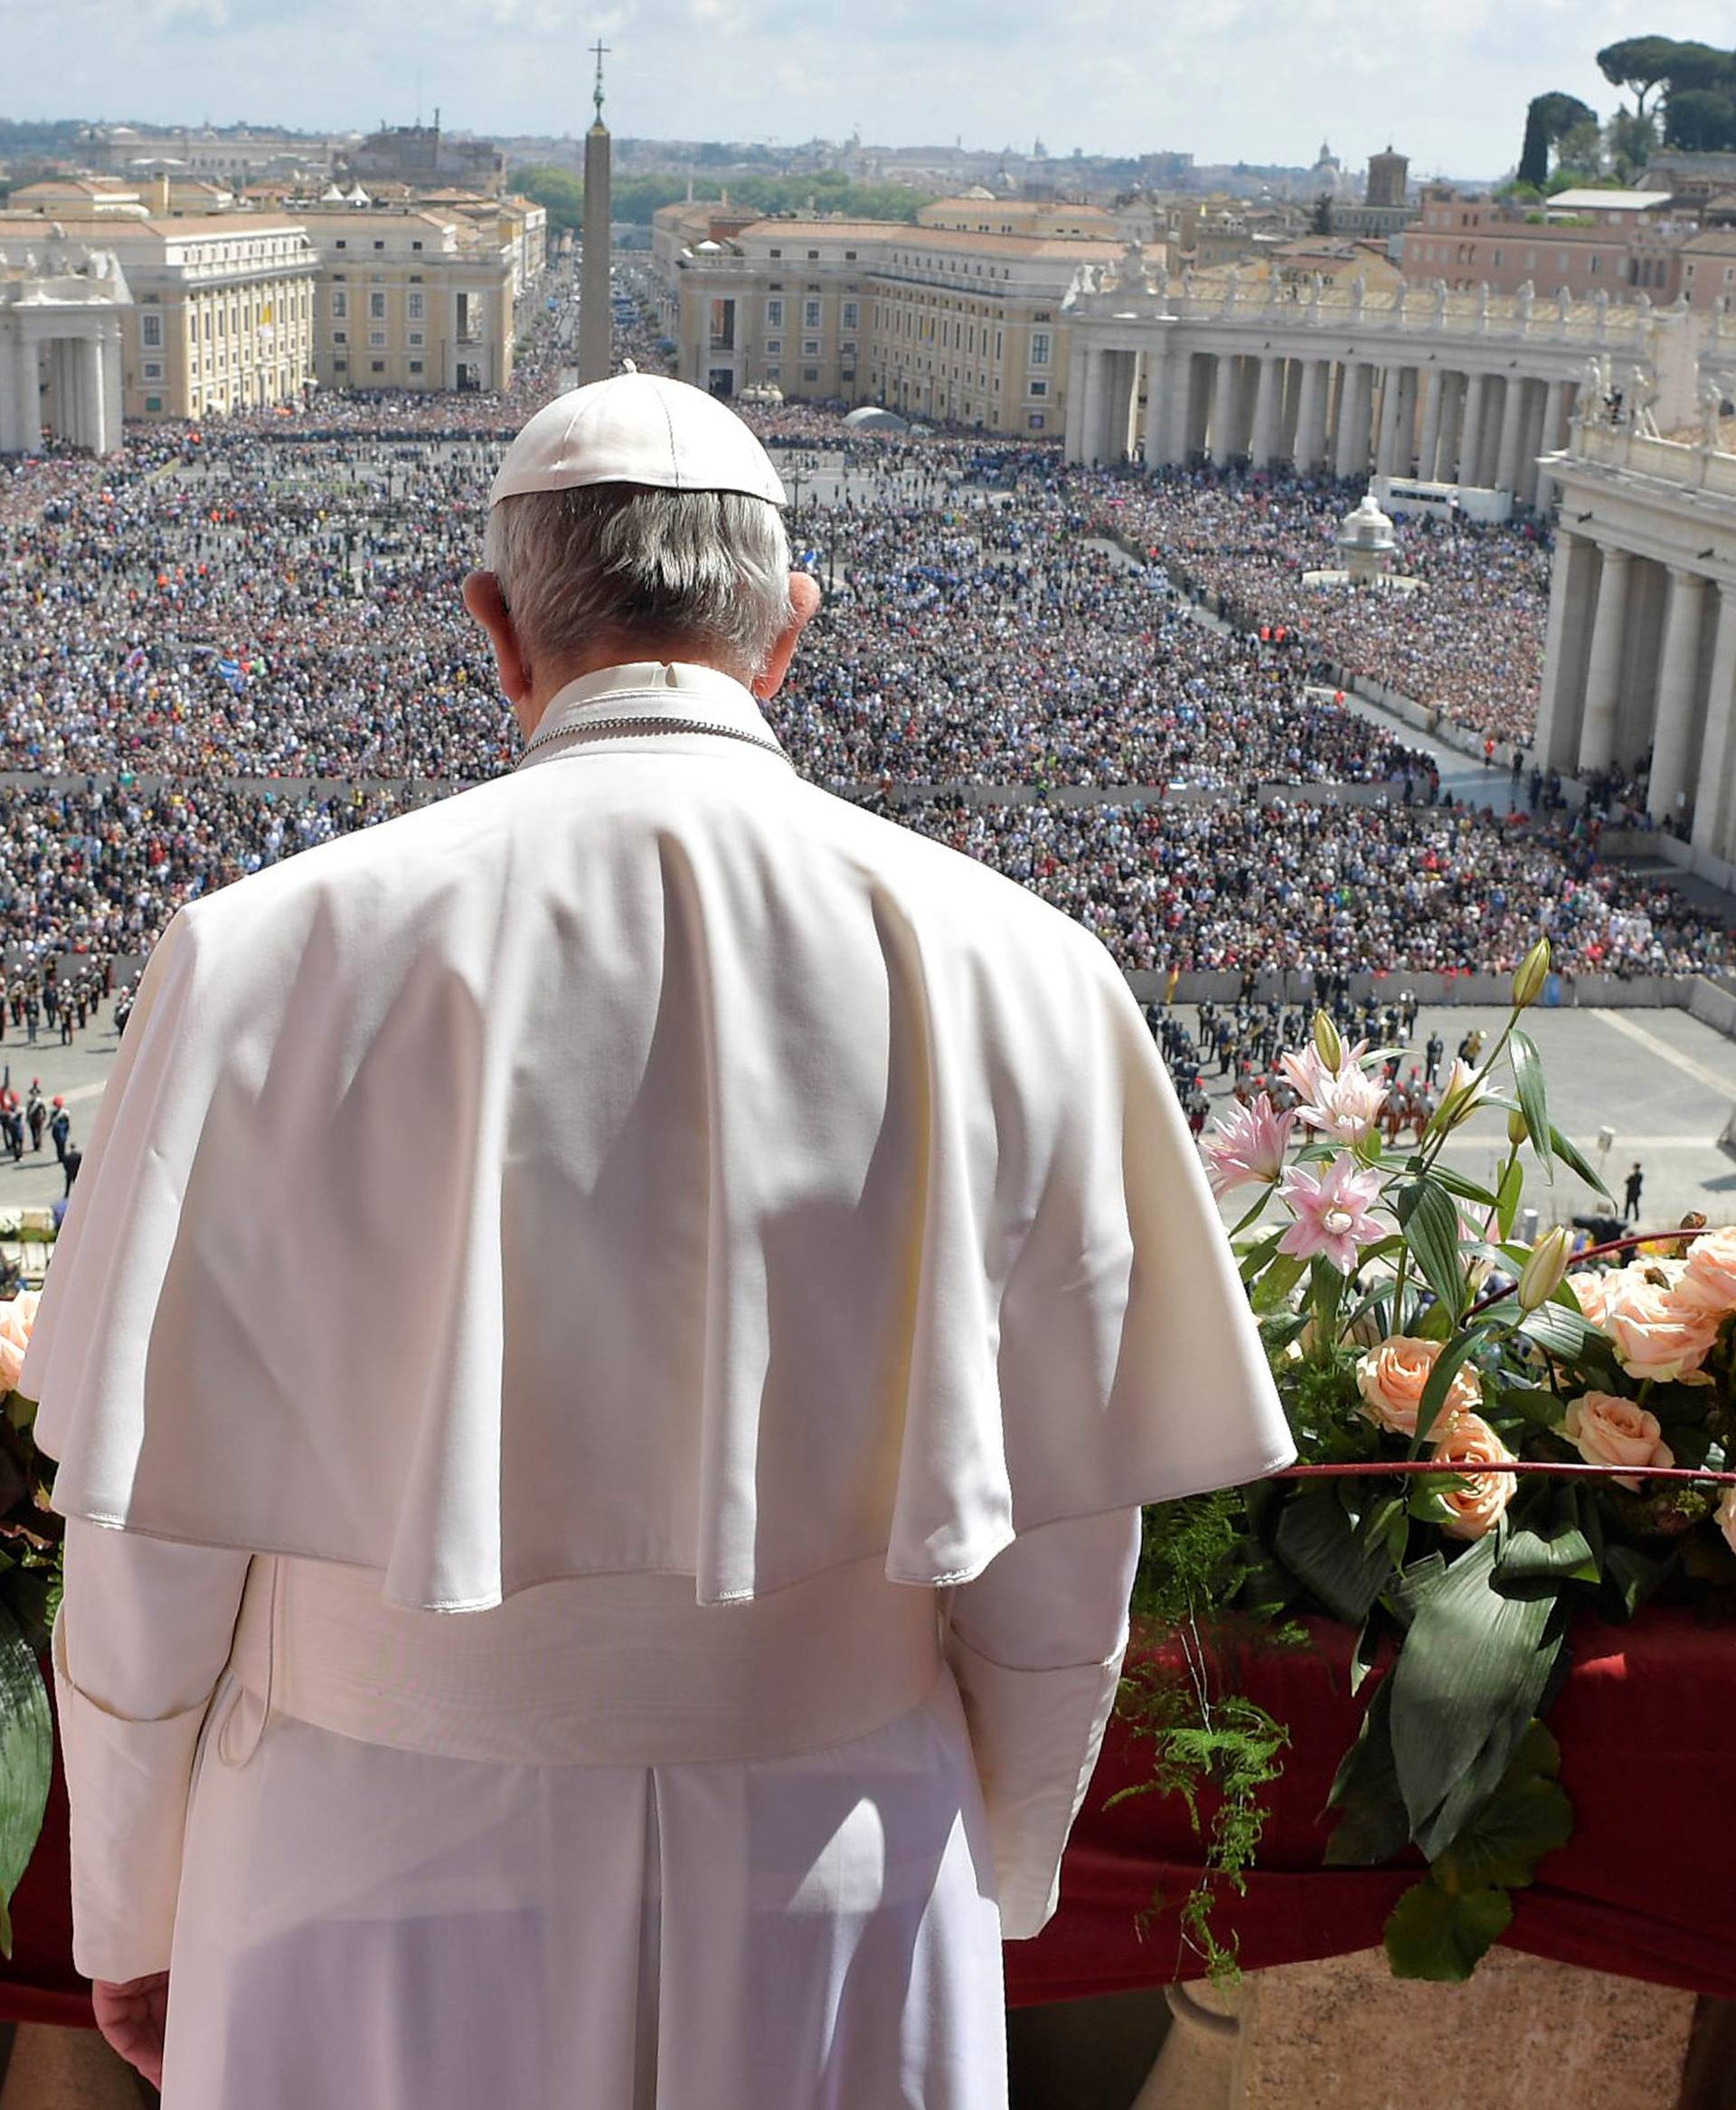 Pope Francis delivers his "Urbi et Orbi" (to the city and the world) message from the balcony overlooking St. Peter's Square at the Vatican